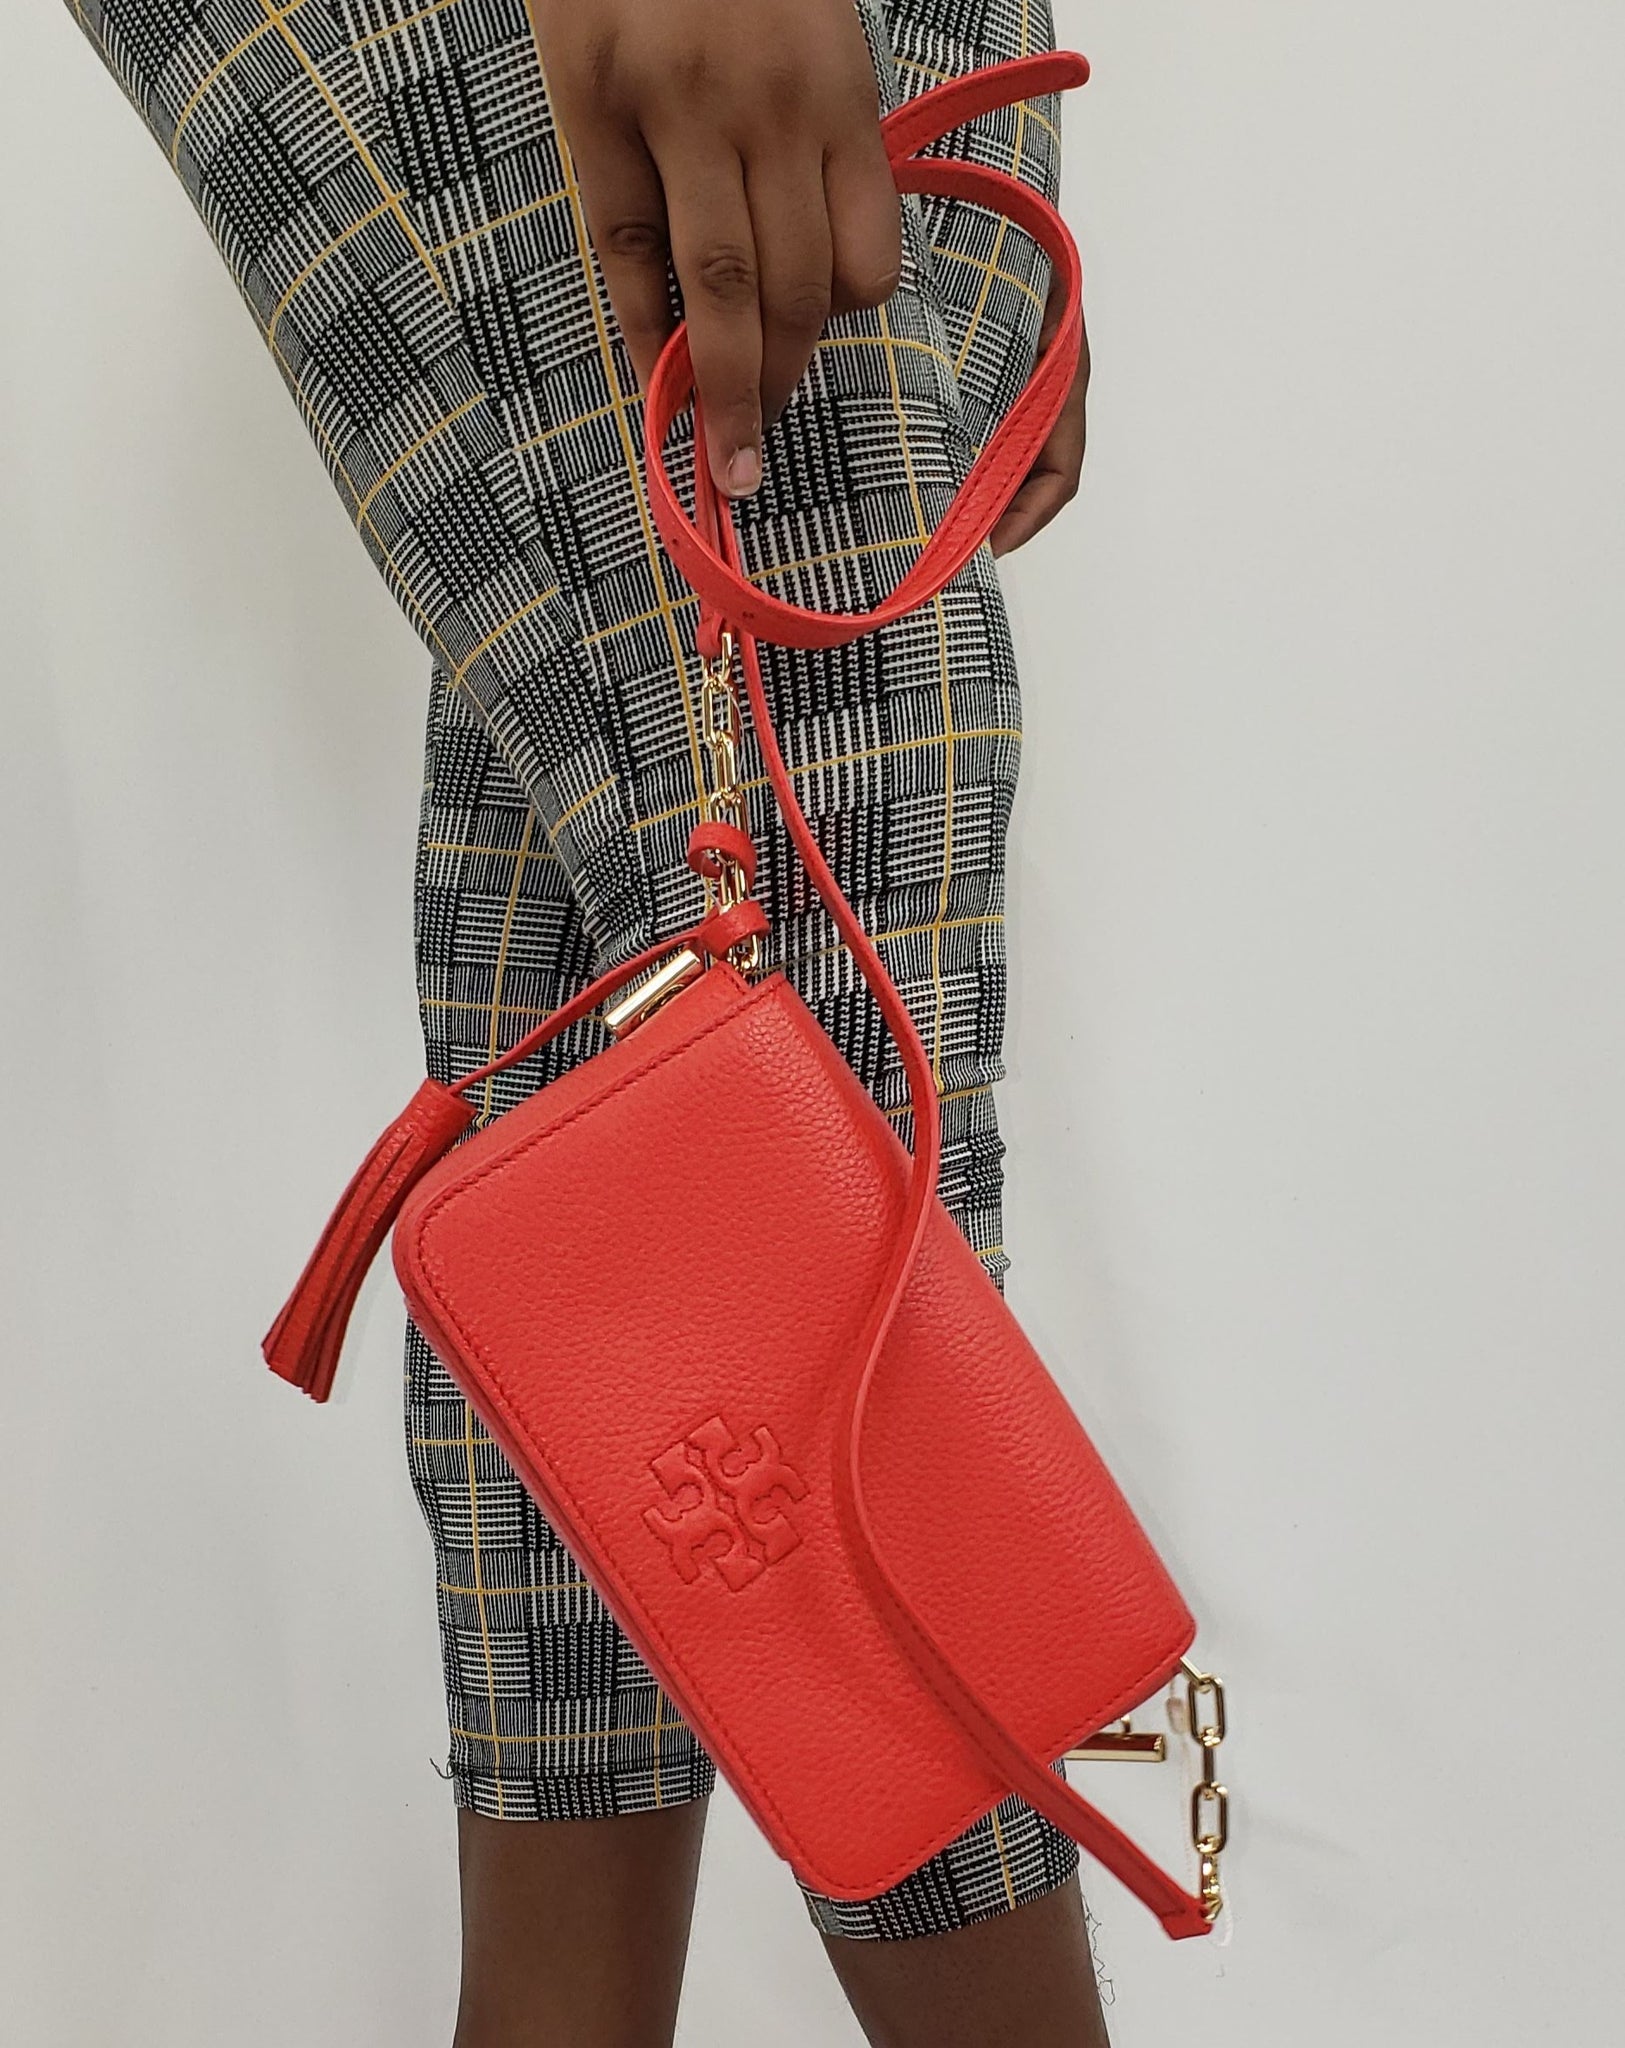 Tory Burch Bags | Tory Burch Emerson Small Top Zip Tote | Color: Red | Size: Os | Monterrozak's Closet